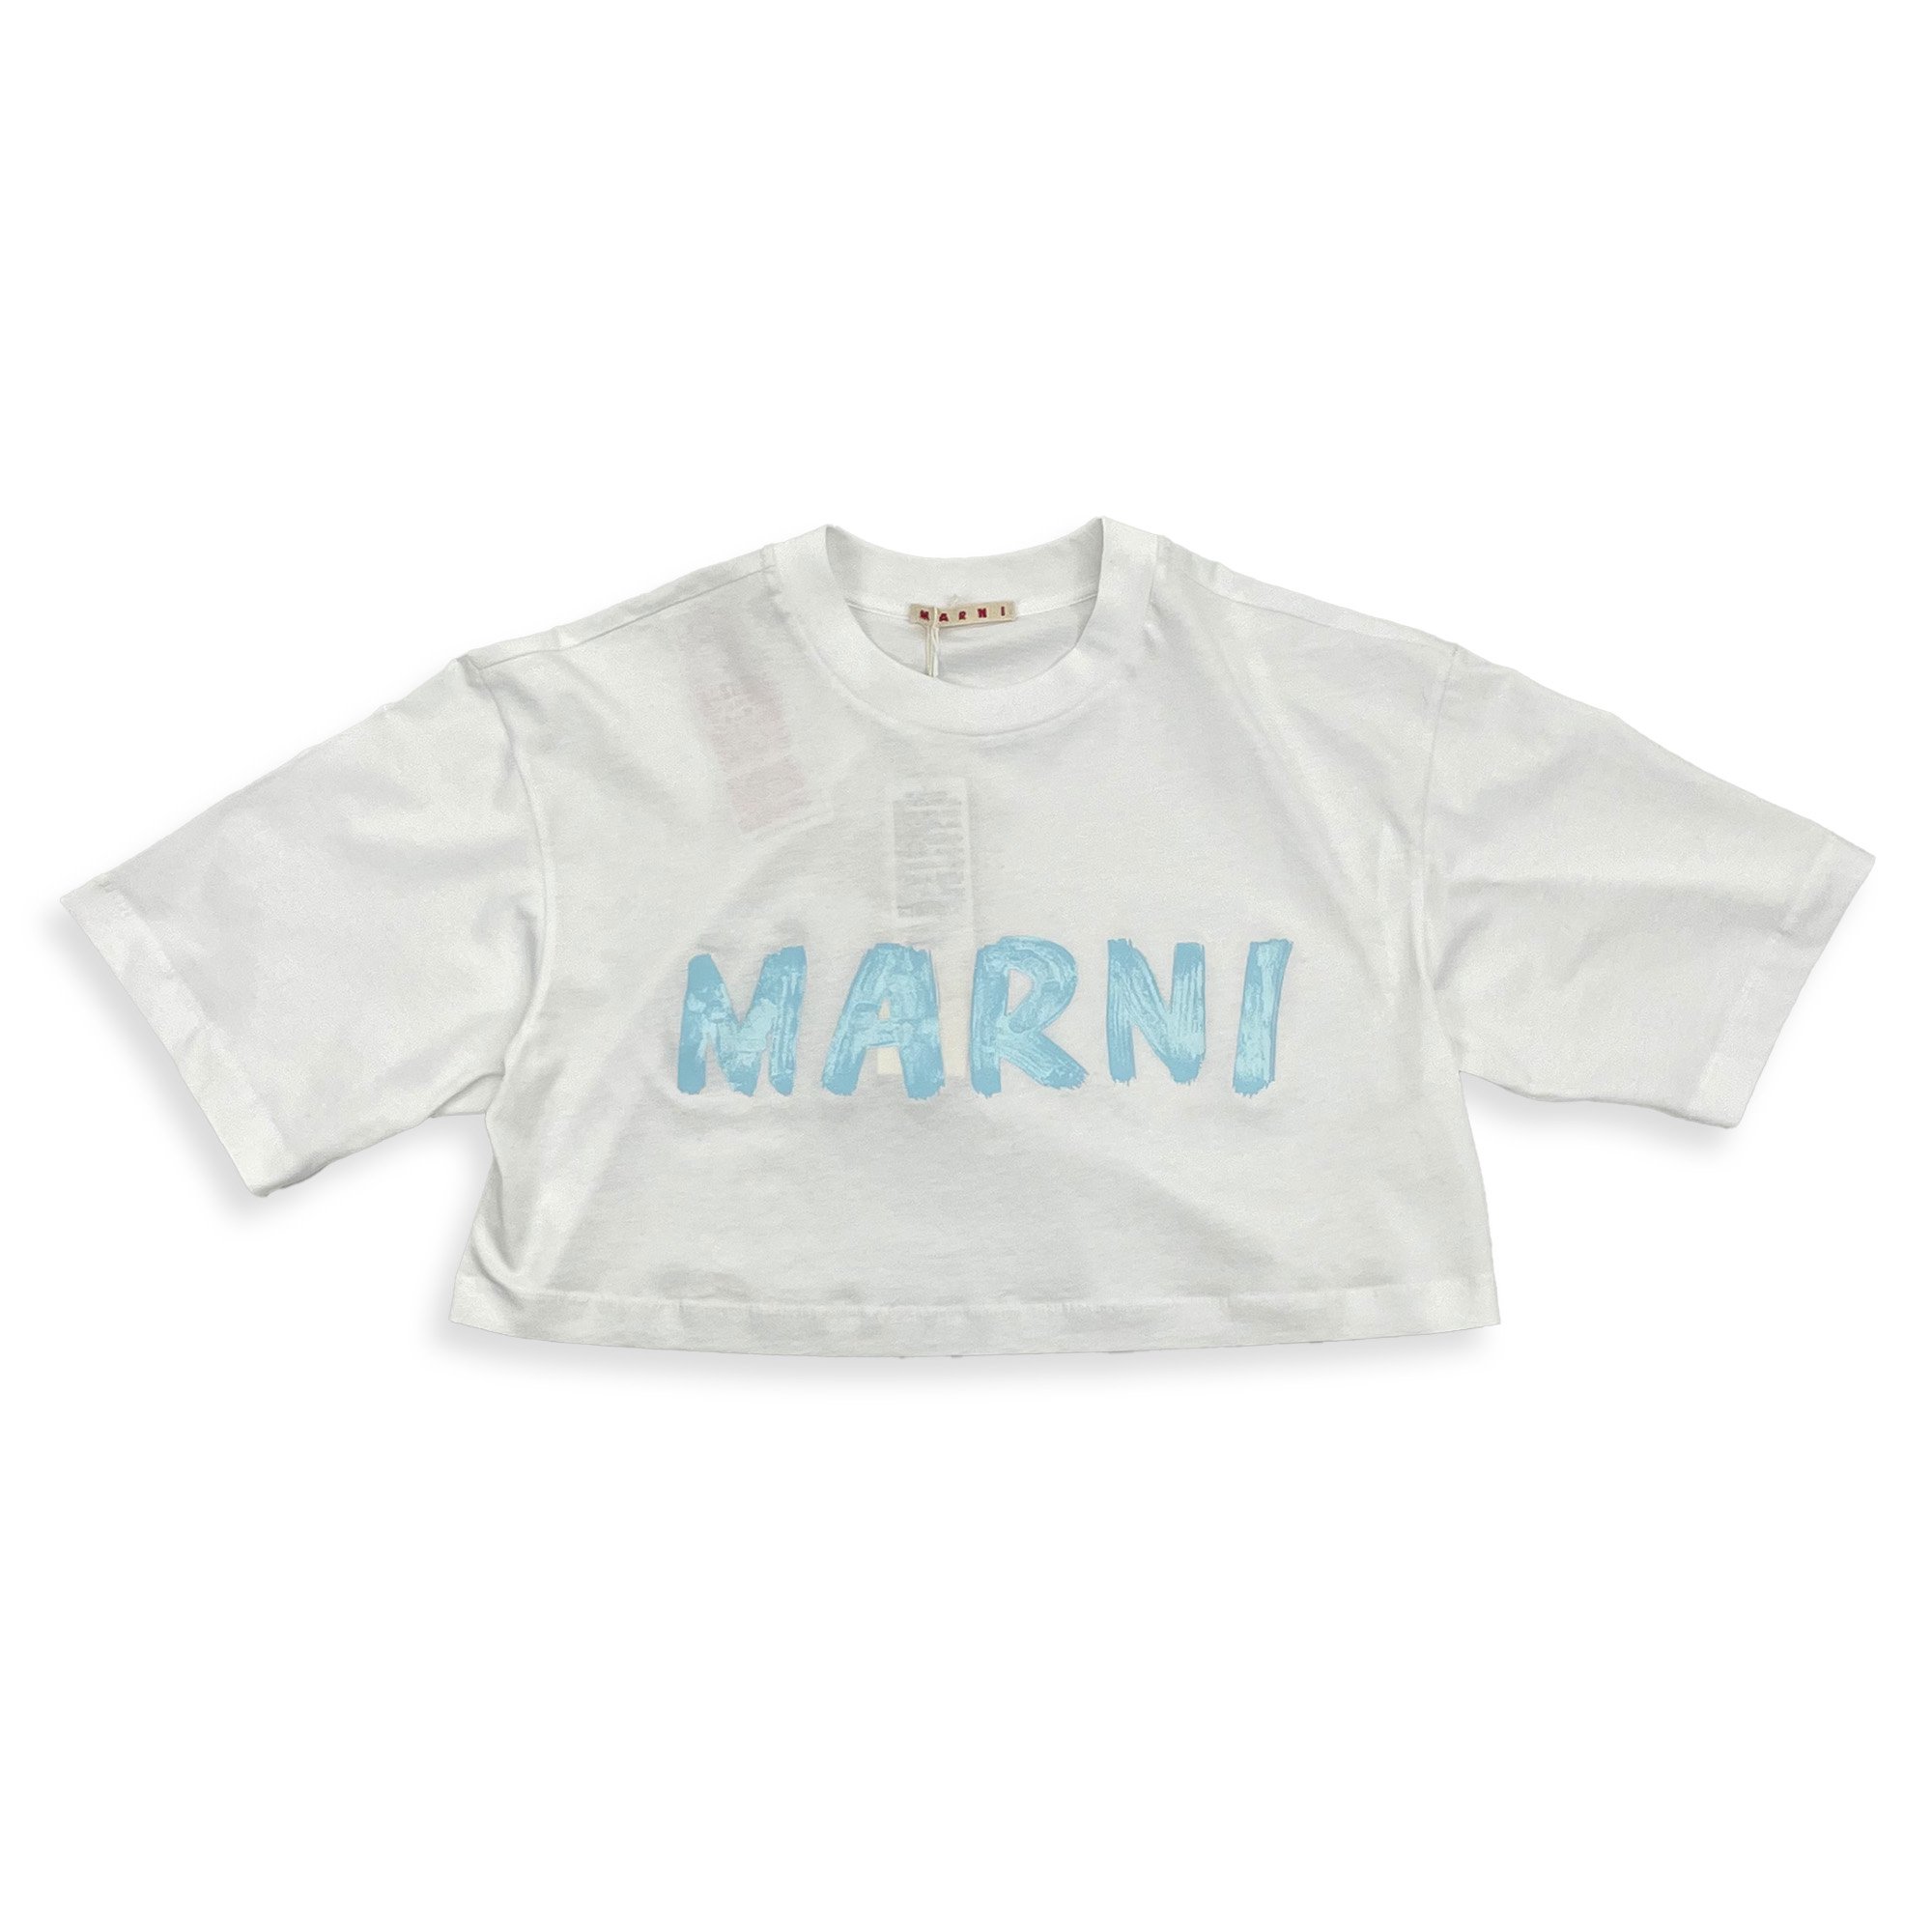 <img class='new_mark_img1' src='https://img.shop-pro.jp/img/new/icons7.gif' style='border:none;display:inline;margin:0px;padding:0px;width:auto;' />MARNI S/S T-SHIRT